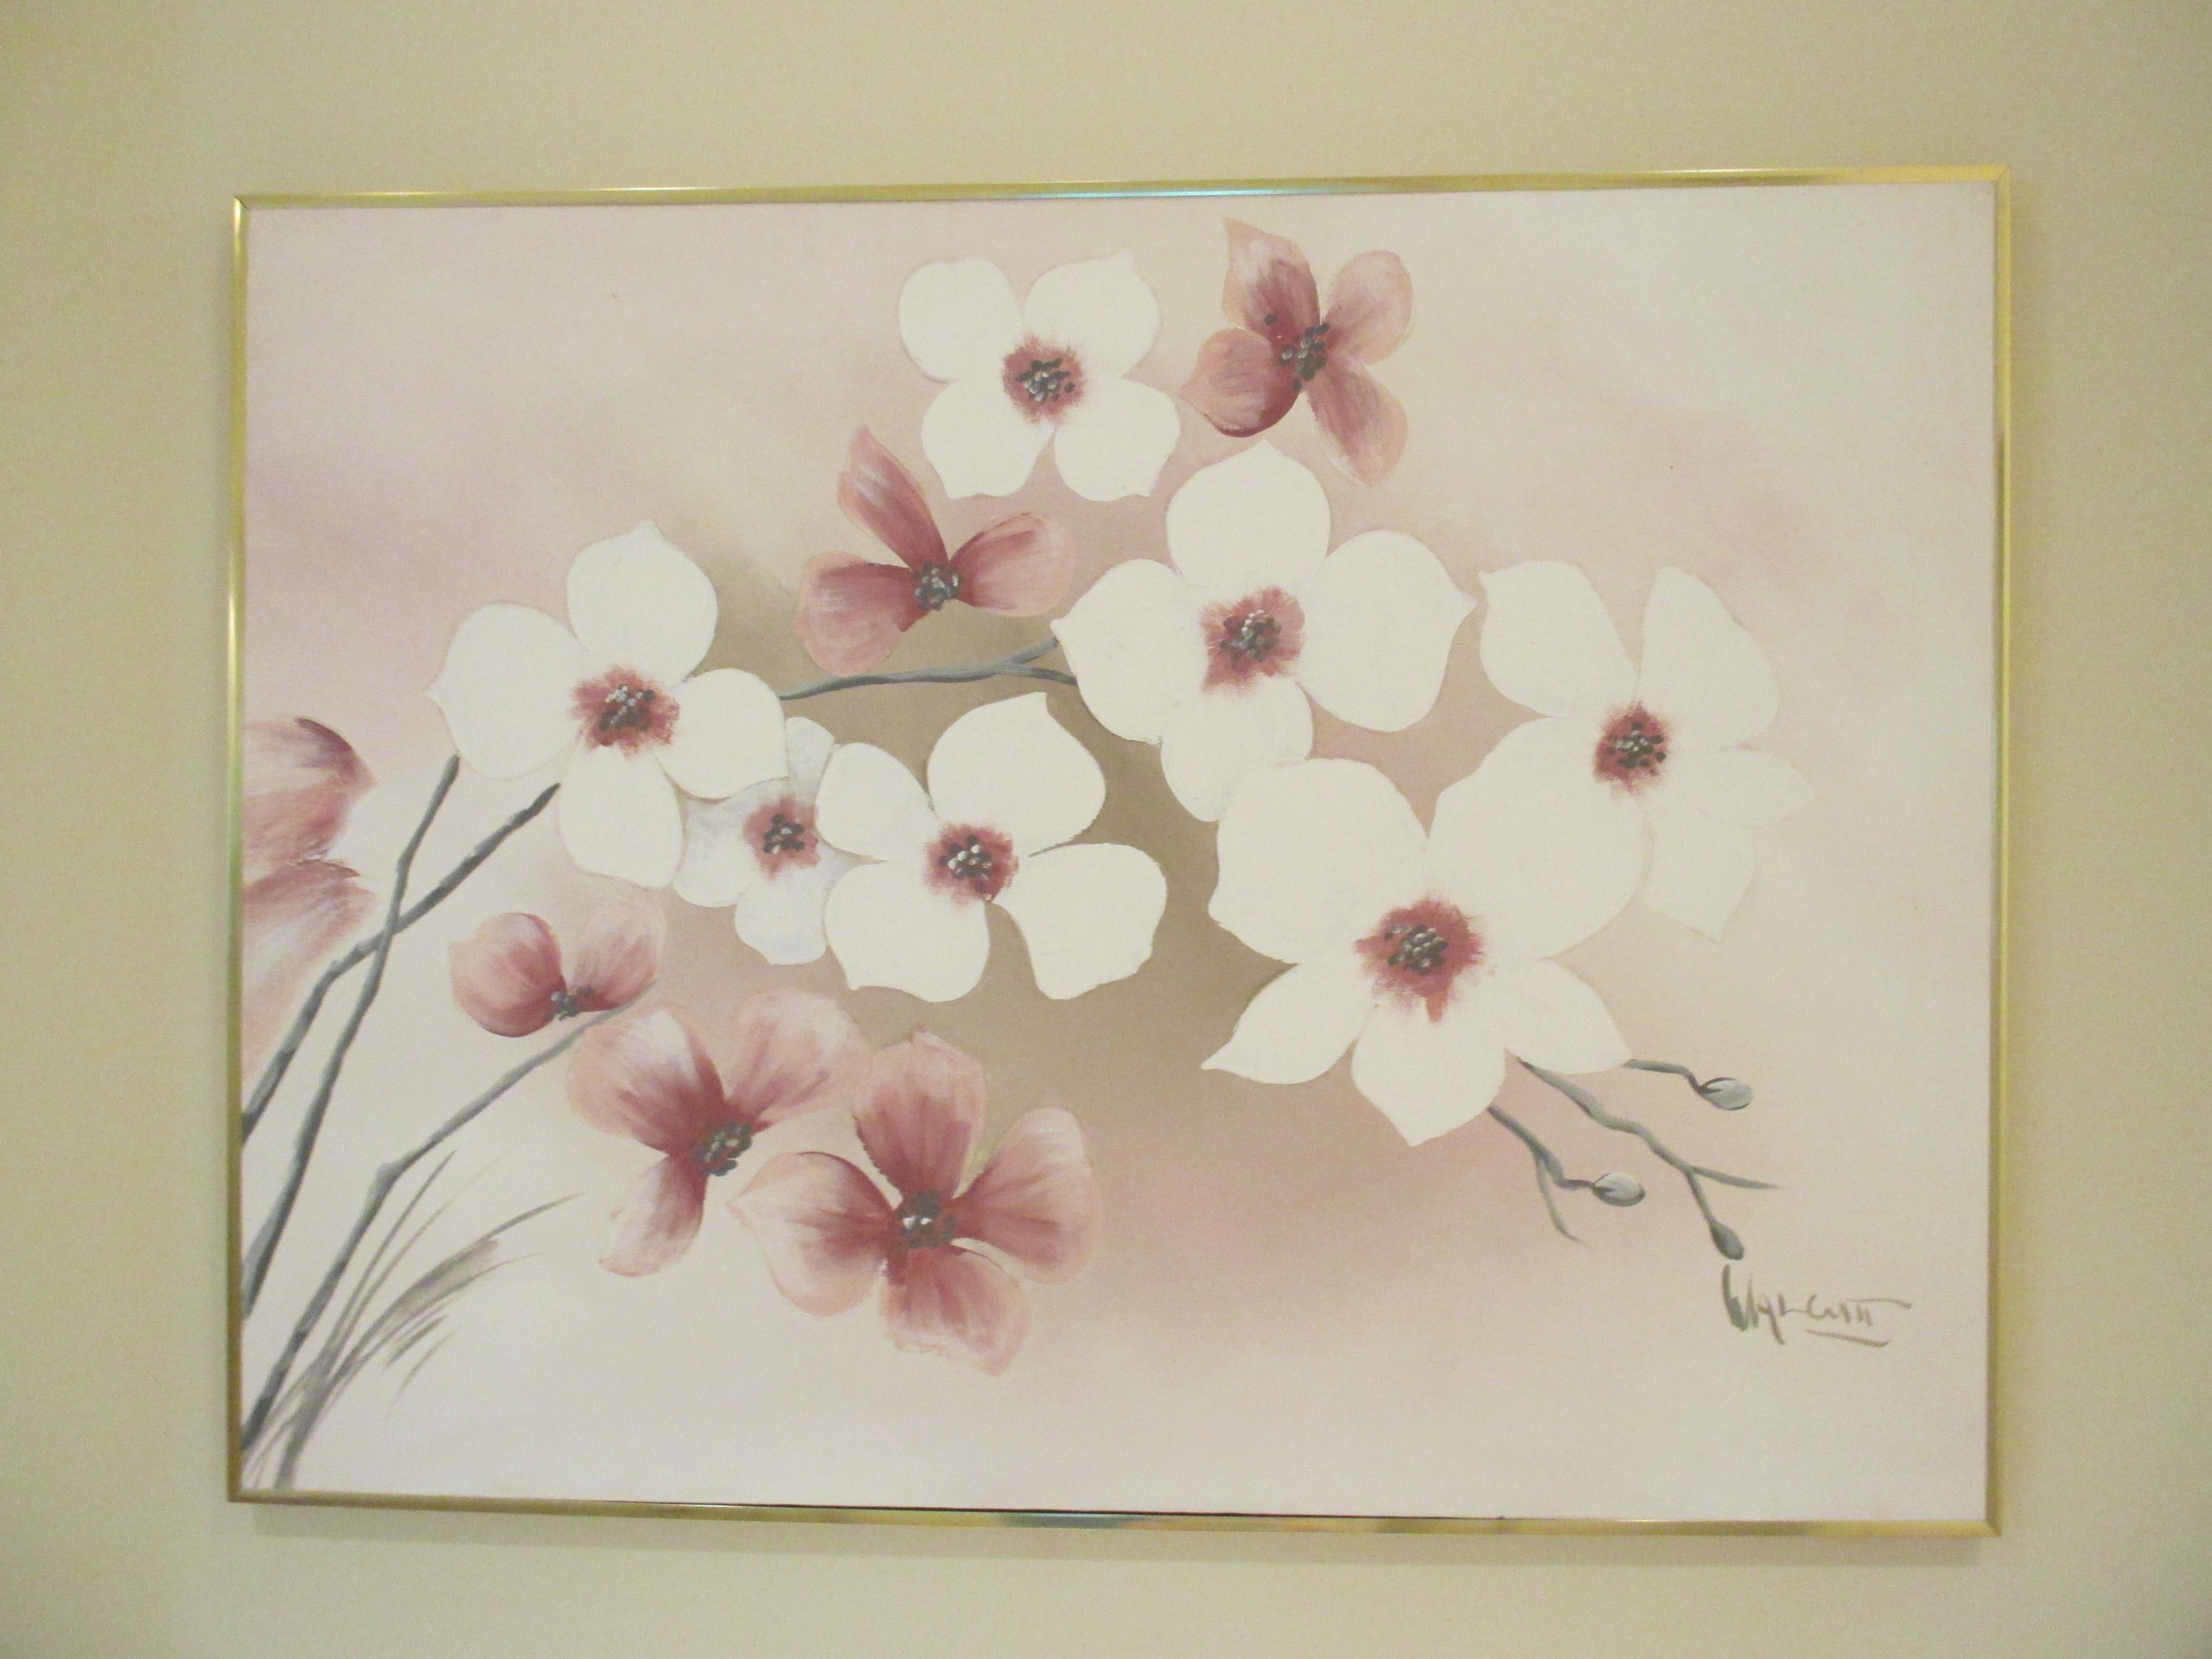 Metal Vintage Cherry Blossom Painting For Sale